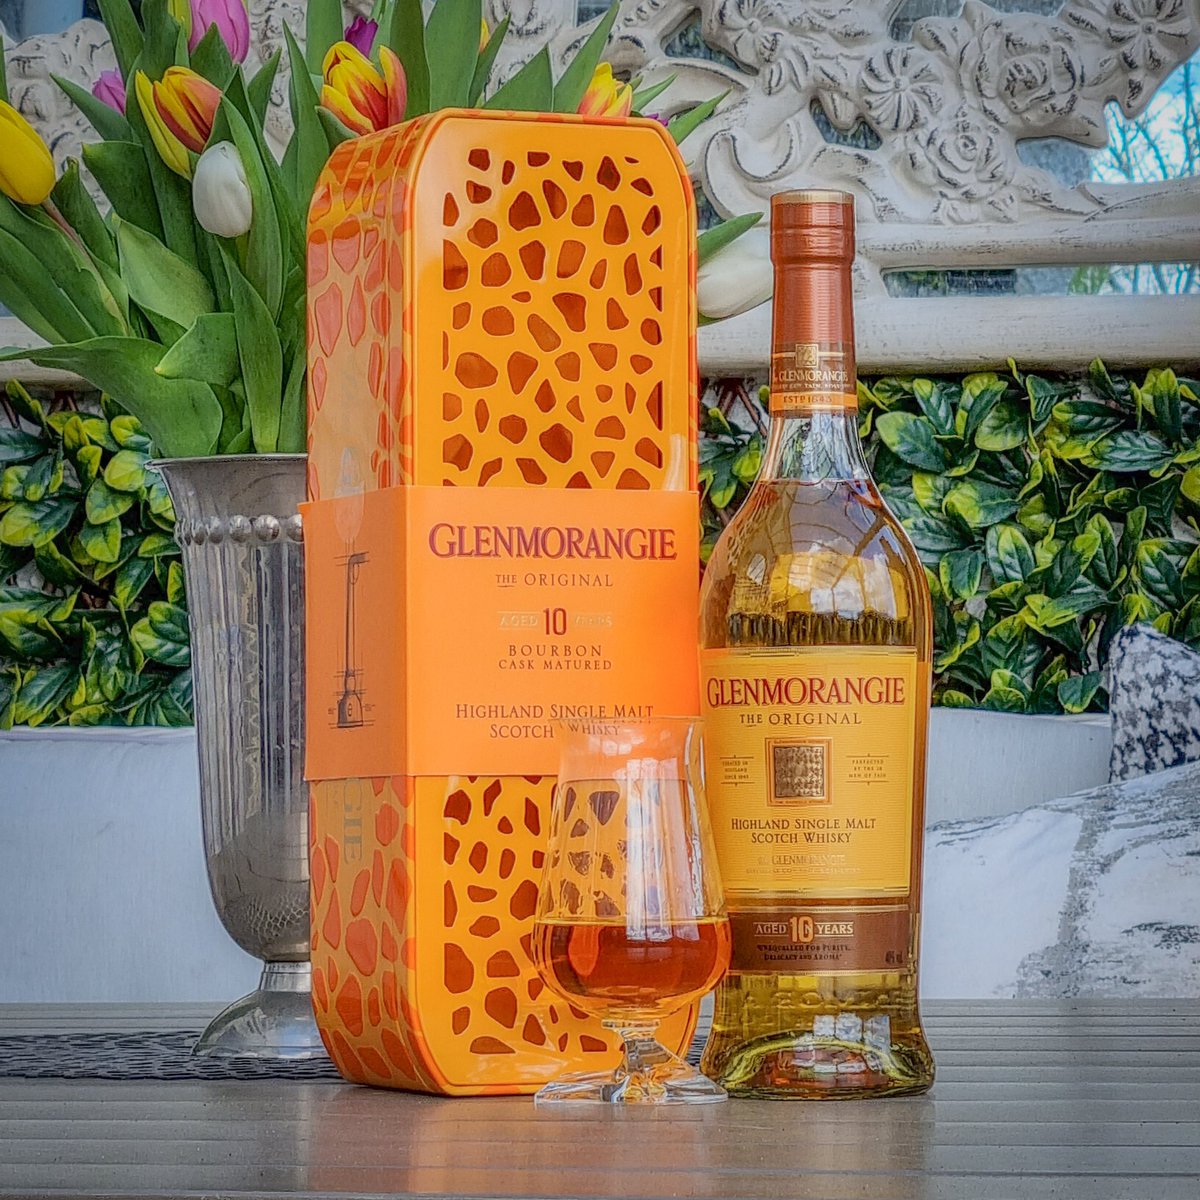 Glenmorangie 10year old is my tipple for this evening. Honey, almonds and a floral finish. Very very nice. #glenmorangie #scotchwhisky #scotchwhiskyexperience #scotchwhiskies #glenmorangie10 #glenmorangiewhisky #whiskeylover #whisky #whiskylover #whiskylovers❤️